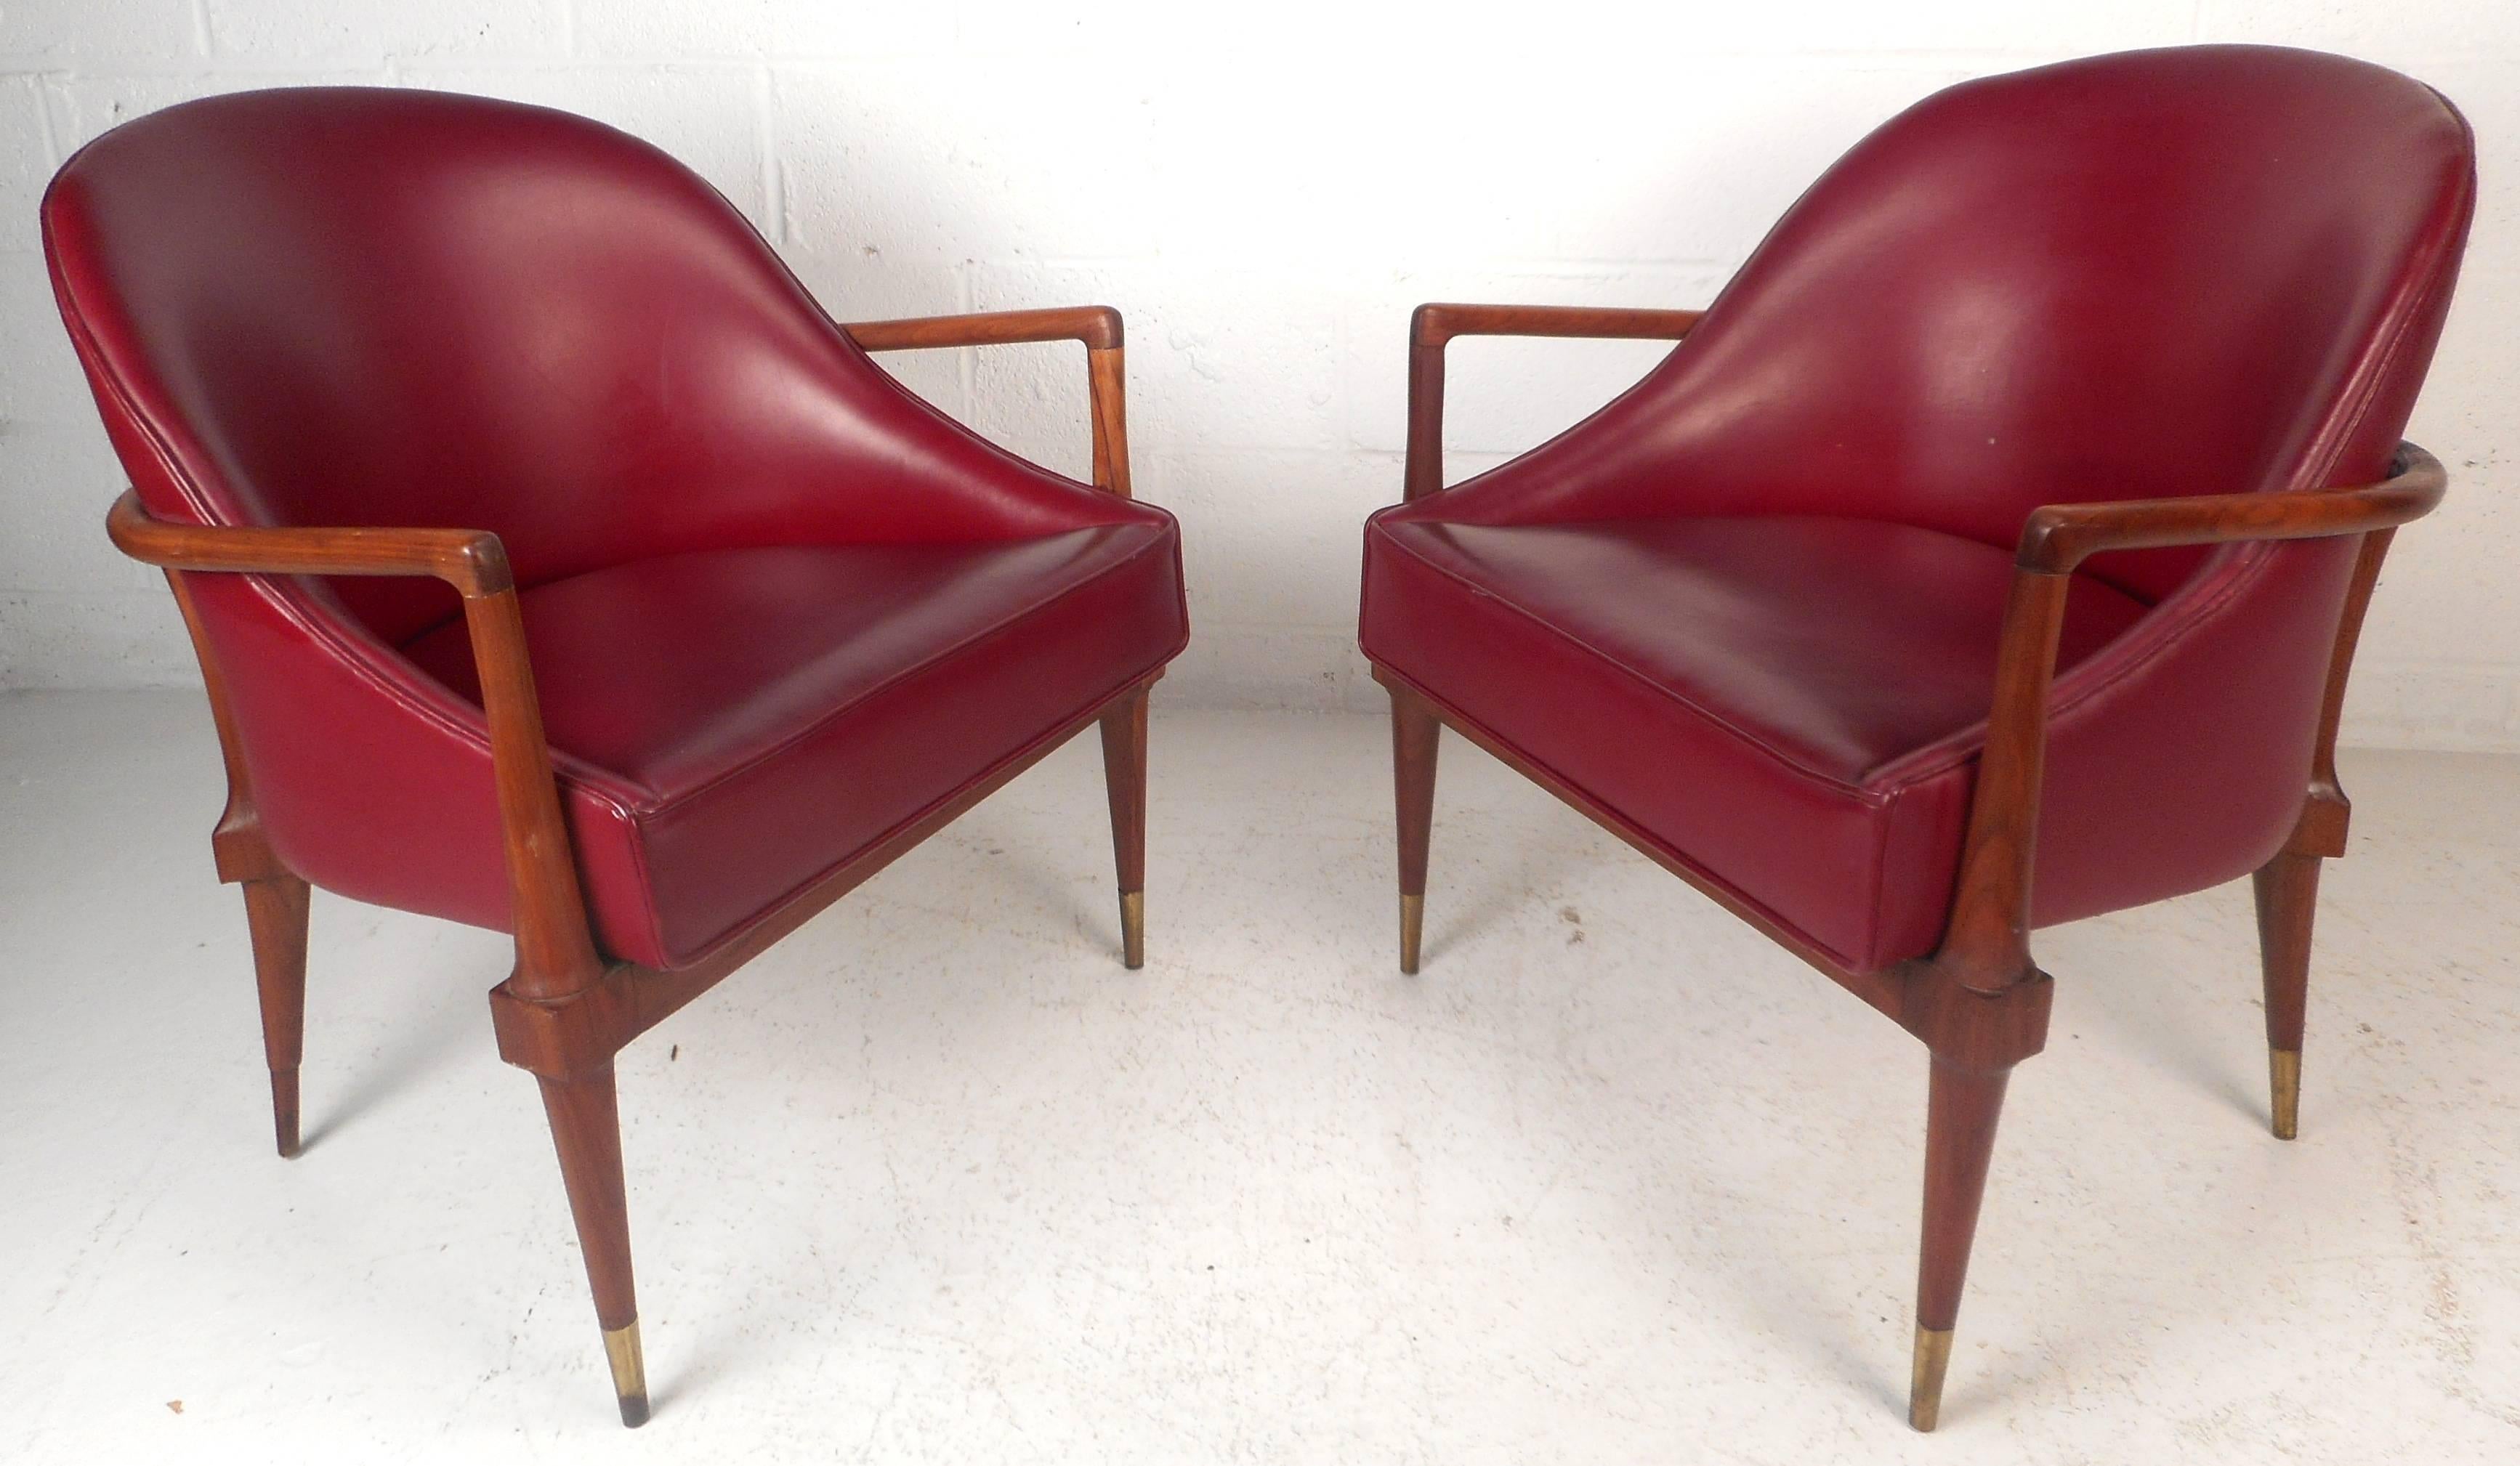 This stunning pair of vintage modern side chairs feature a solid walnut frame, brass feet, and beautiful crimson red vinyl upholstery. The stylish barrel back walnut frame wraps all the way around into unique rounded arm rests. Sculpted fixtures on